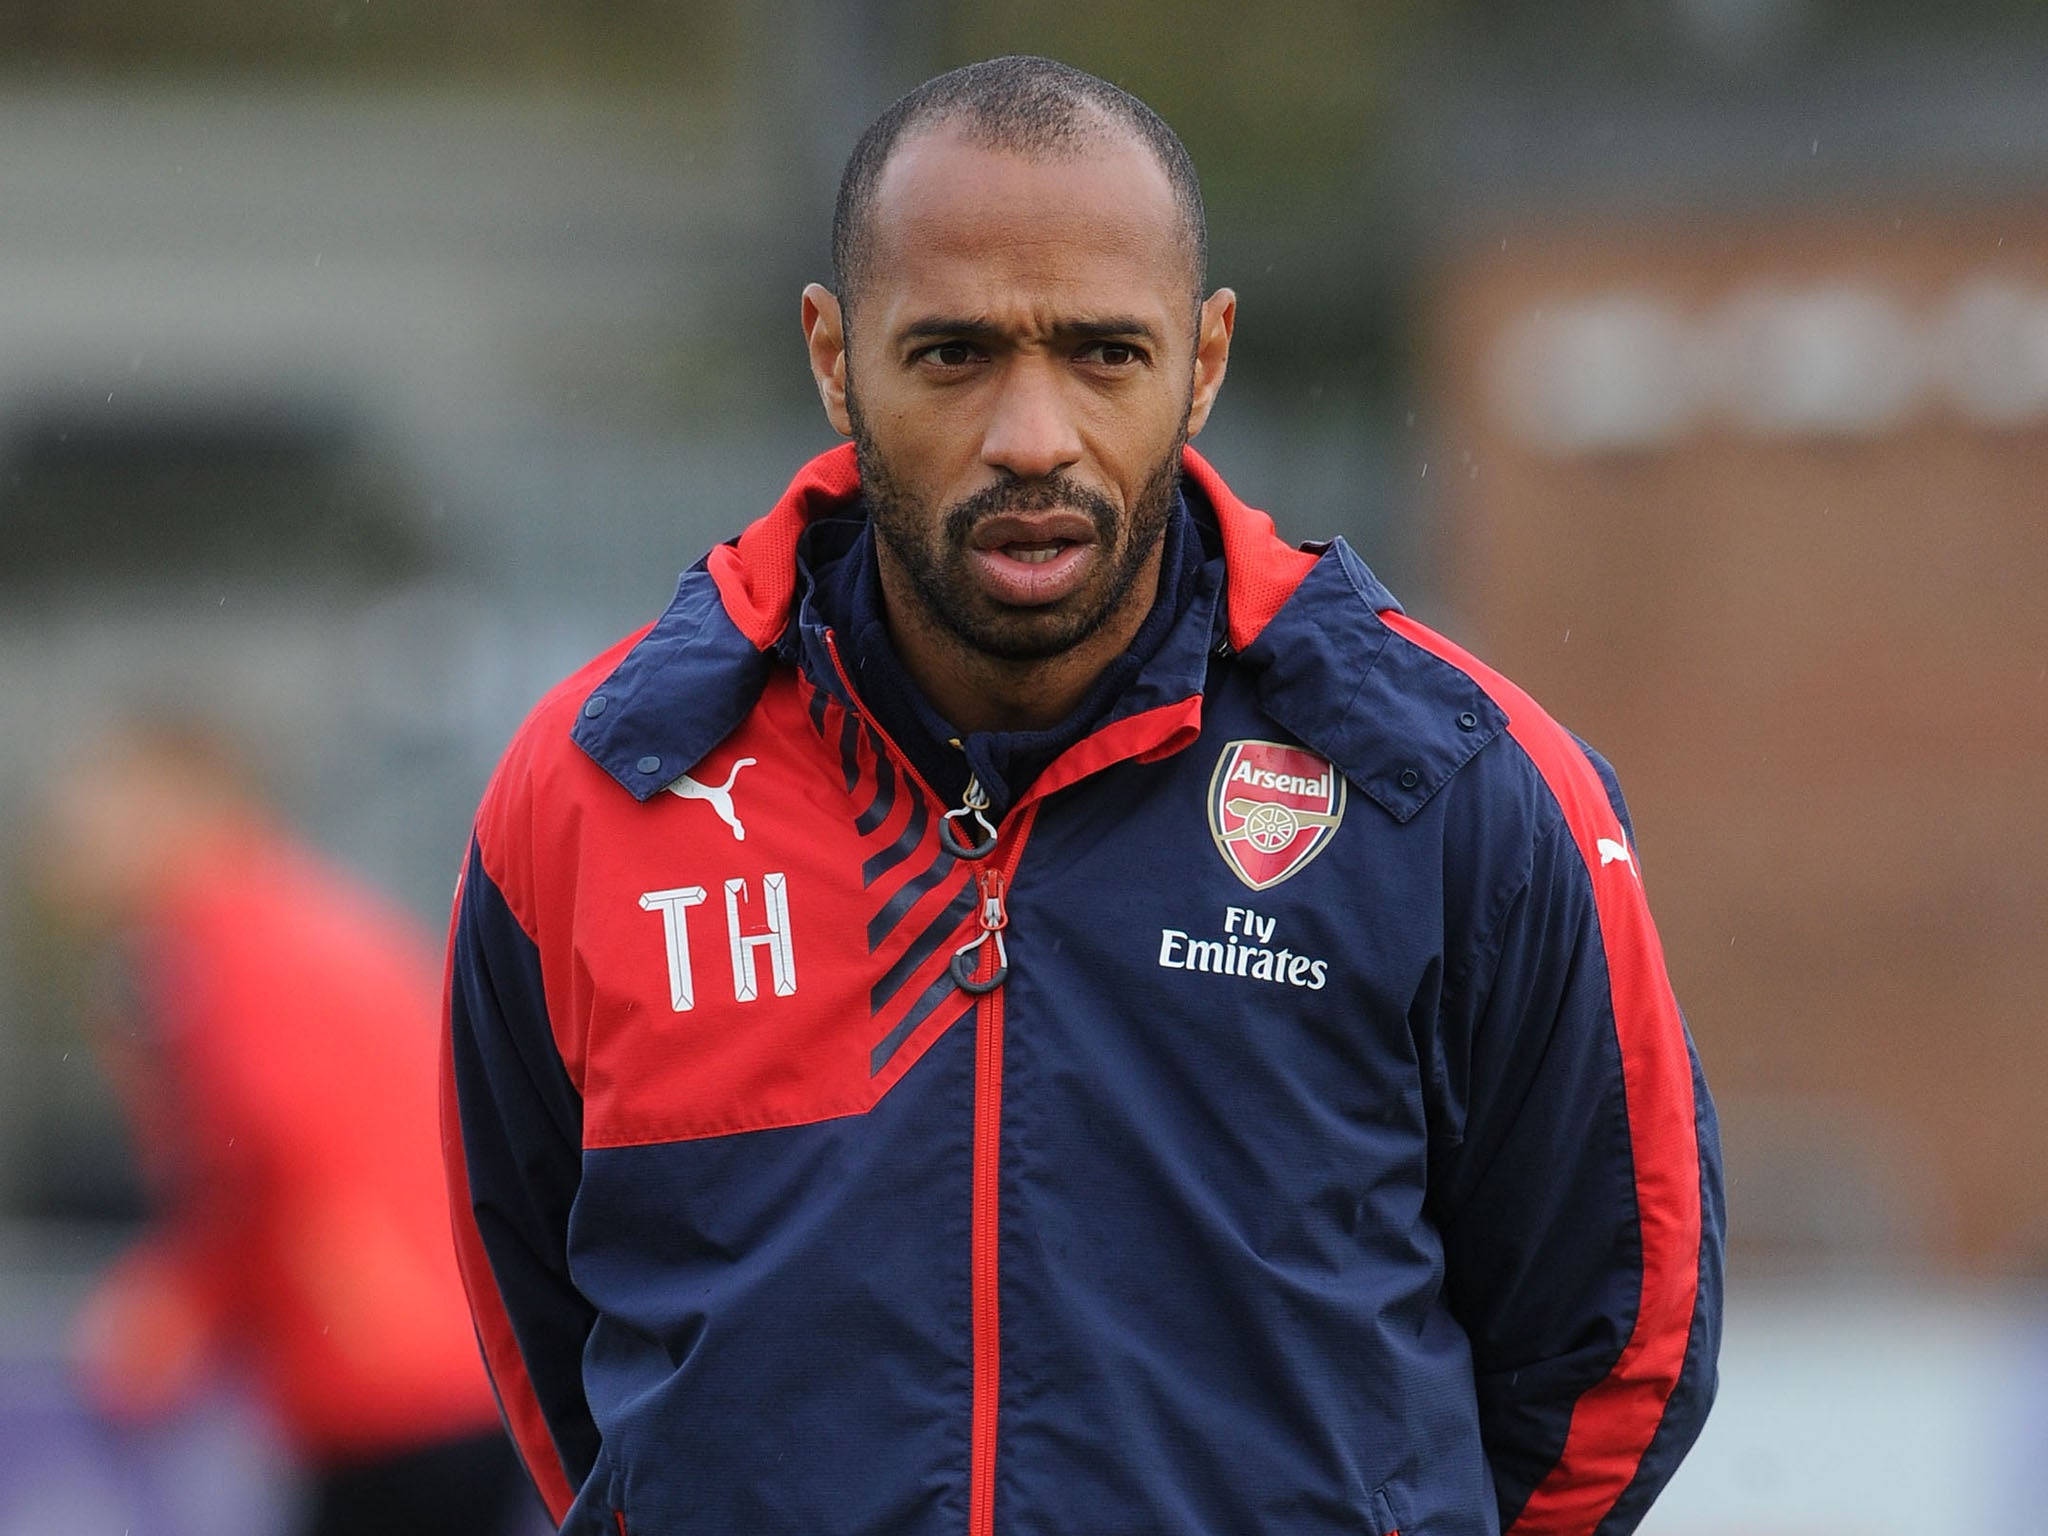 Wenger has been criticised for not keeping Henry at Arsenal